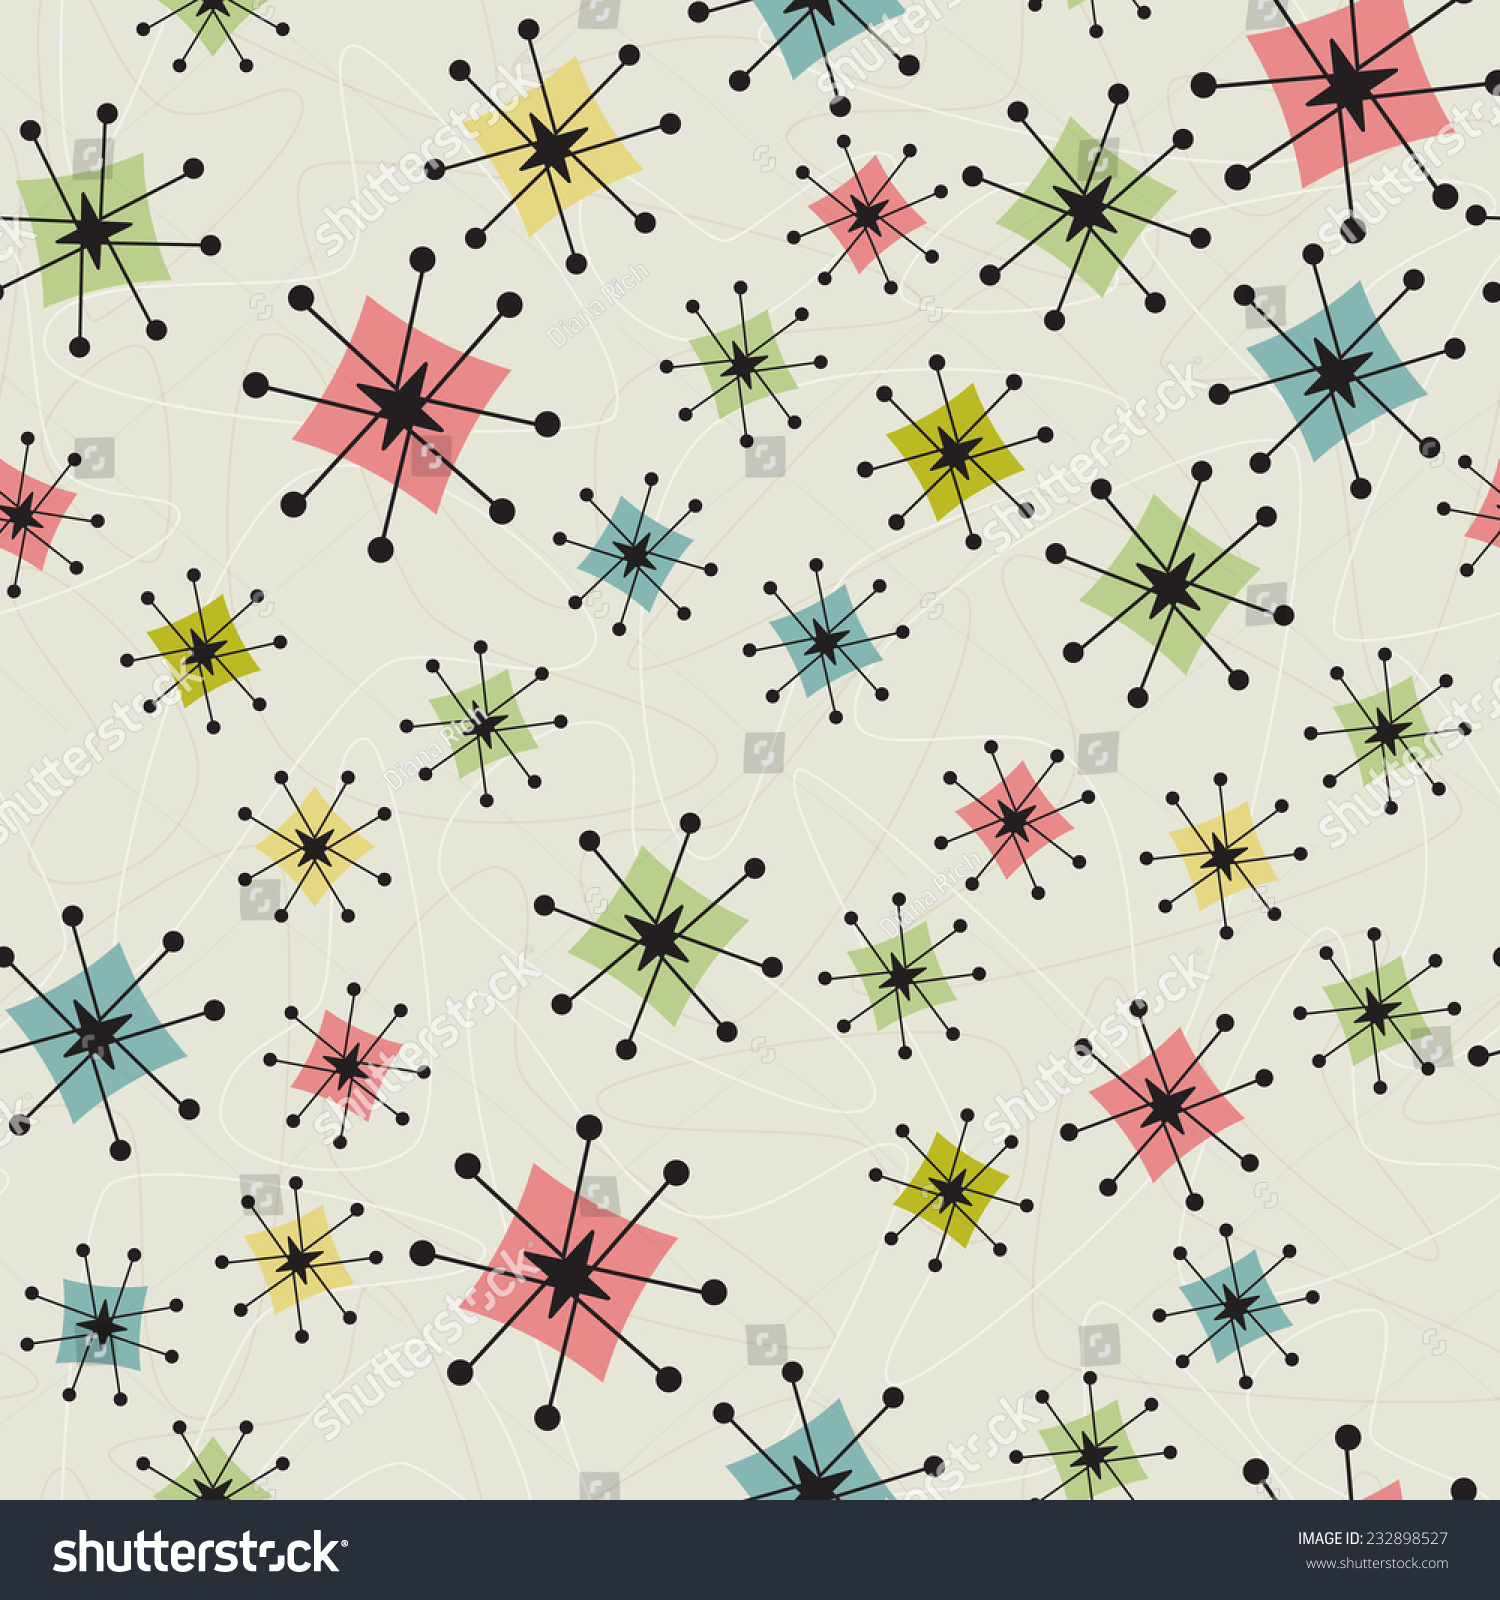 SVG of Seamless Vintage Atomic Stars Background Retro-stylized seamless atomic stars pattern on a background of boomerangs. Items are grouped so you can use them independently from the background.  svg